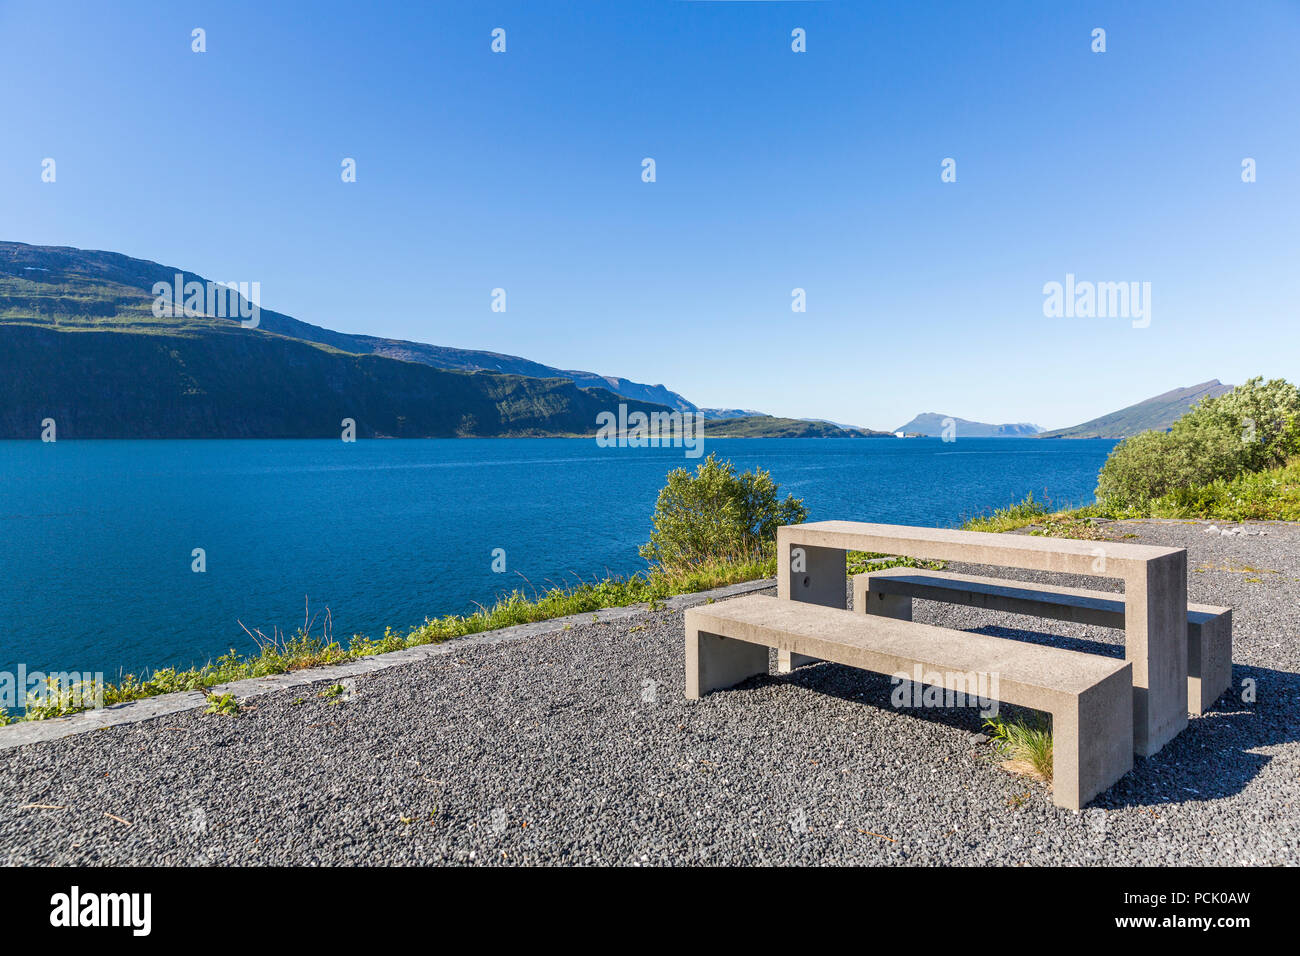 View of the Sjonafjord from the Hellaga rest area, Norway Stock Photo